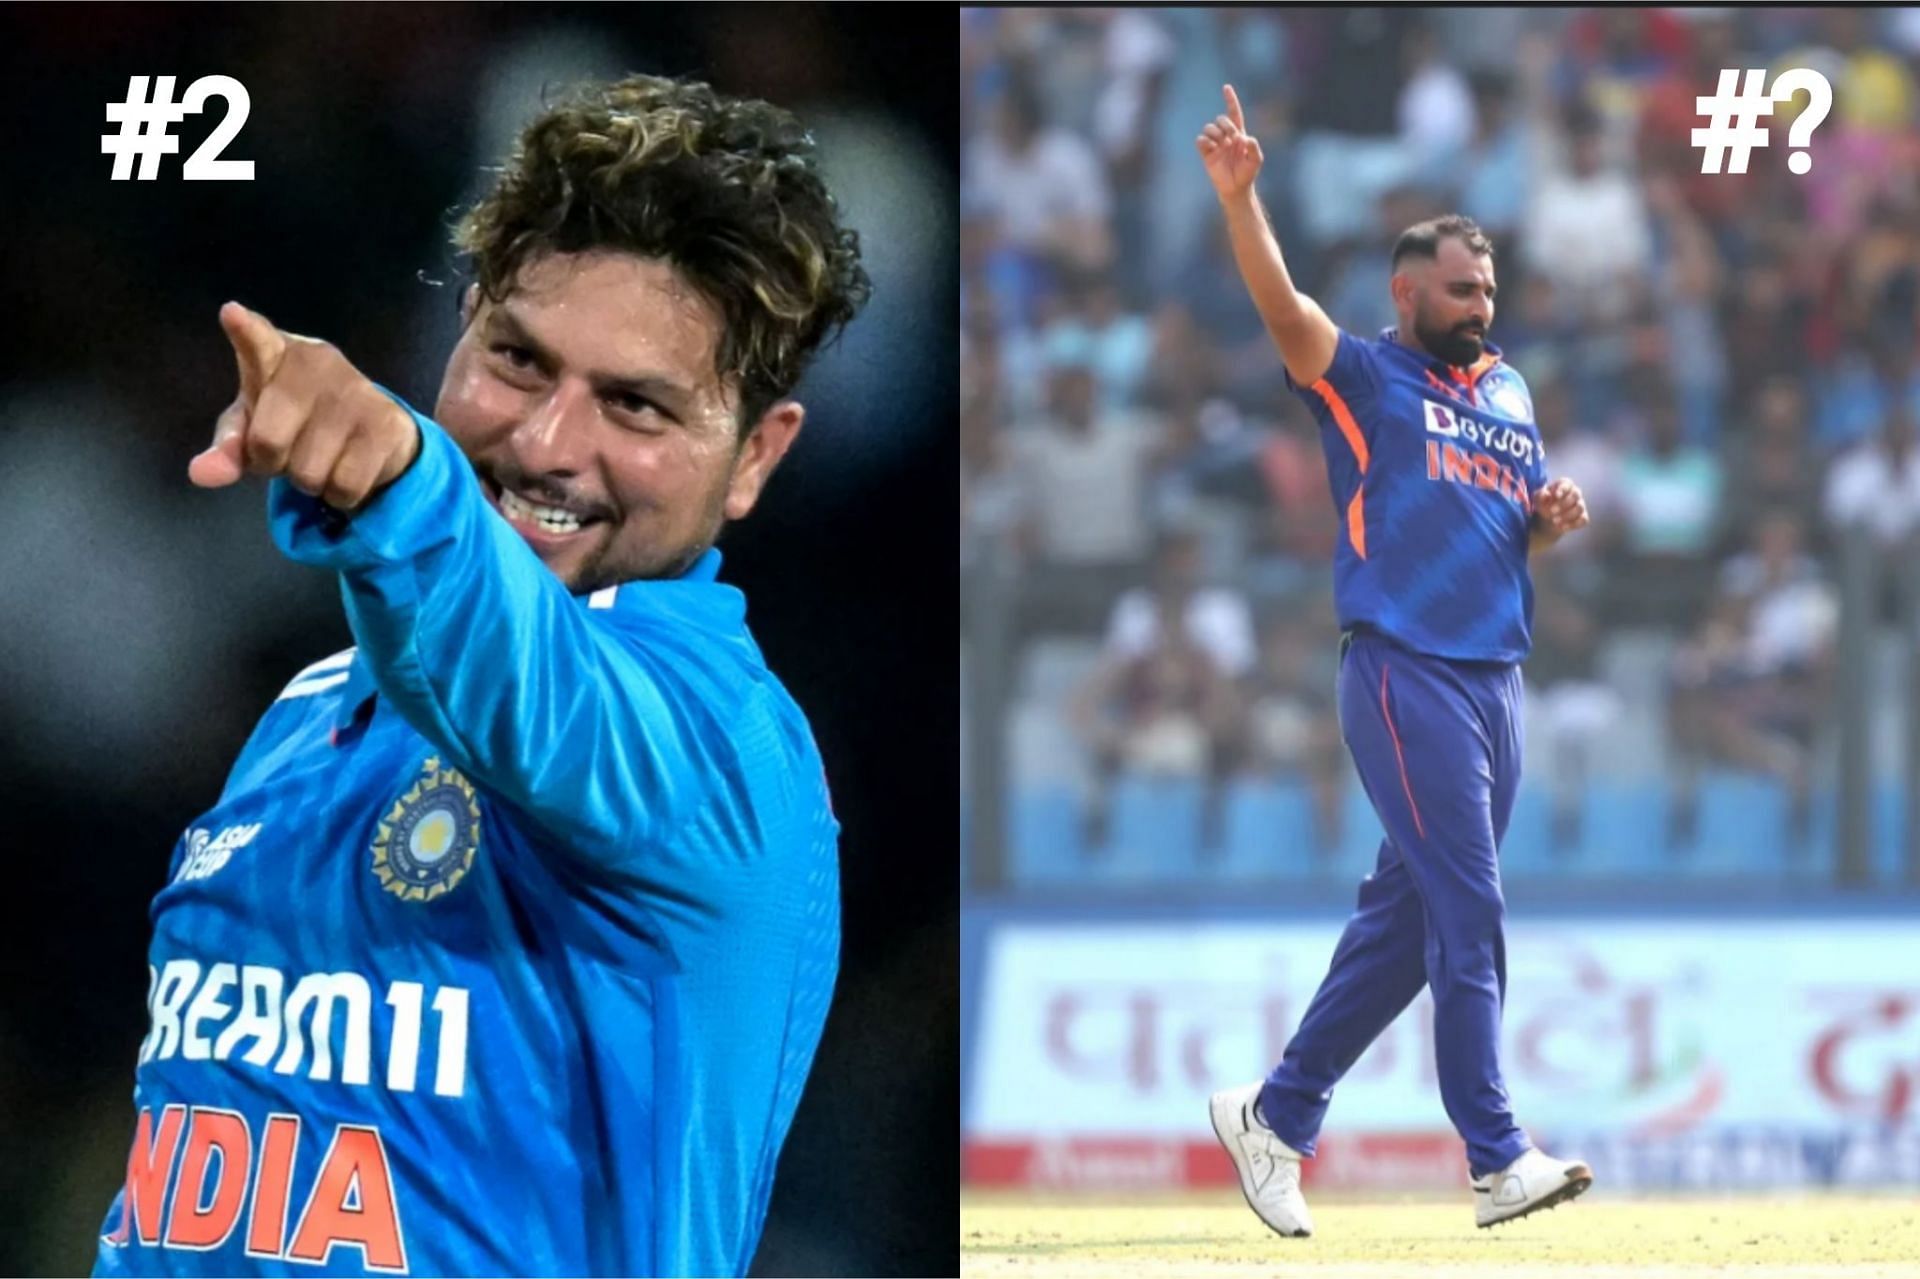 Kuldeep Yadav recently took his 150th ODI wicket [Getty Images]